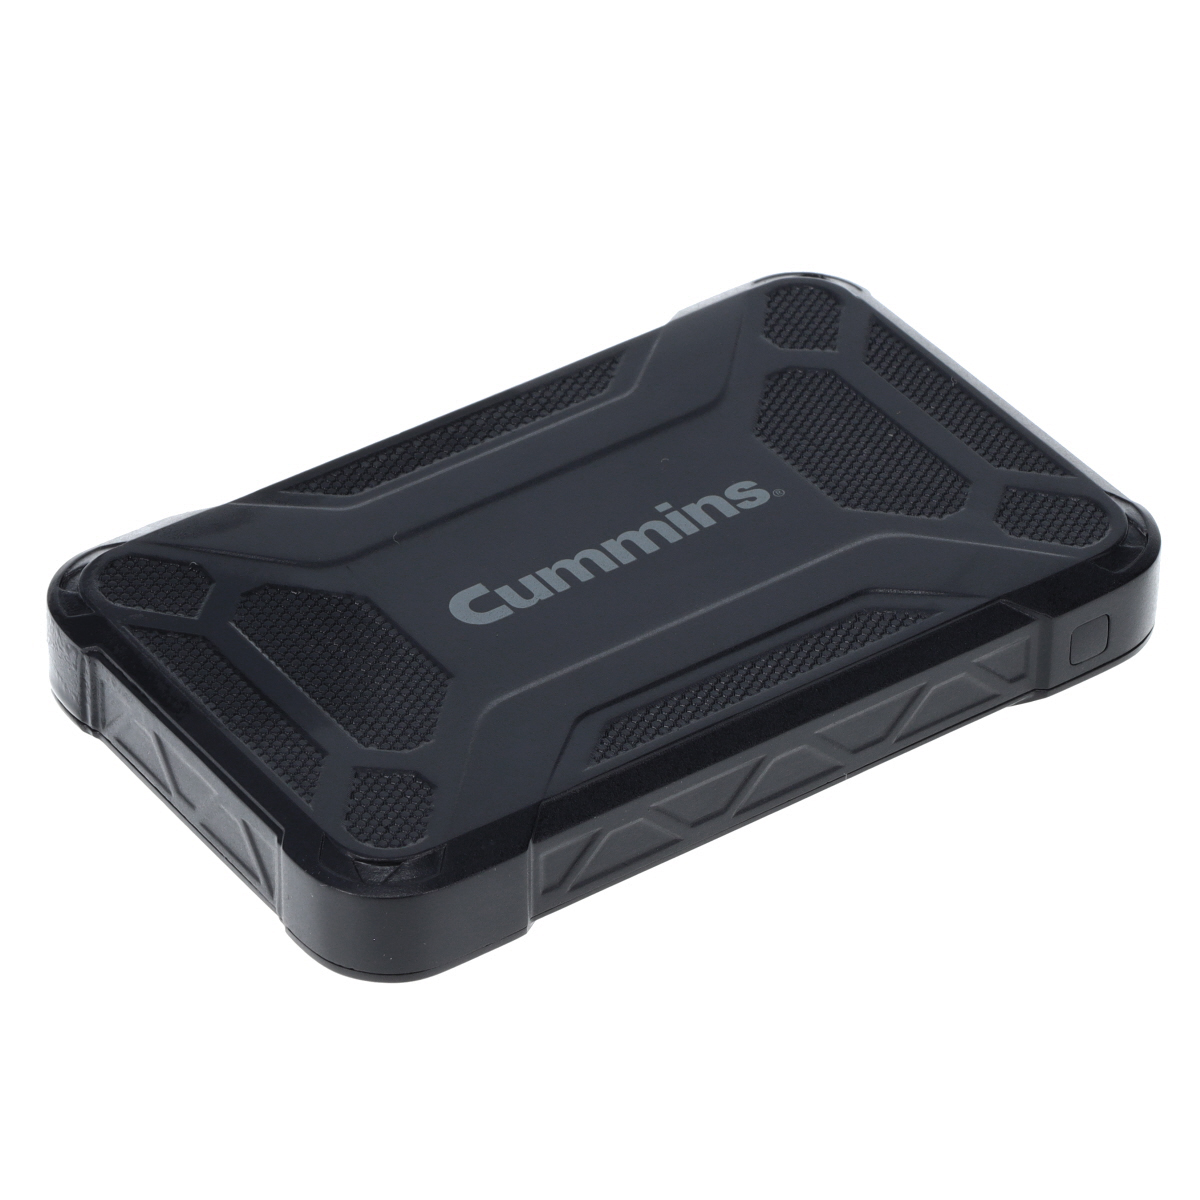 Cummins Power Bank 5000mAh 3-Port Fast Charging Power Bank with Multiple Ports and 3ft Cable CMN4719